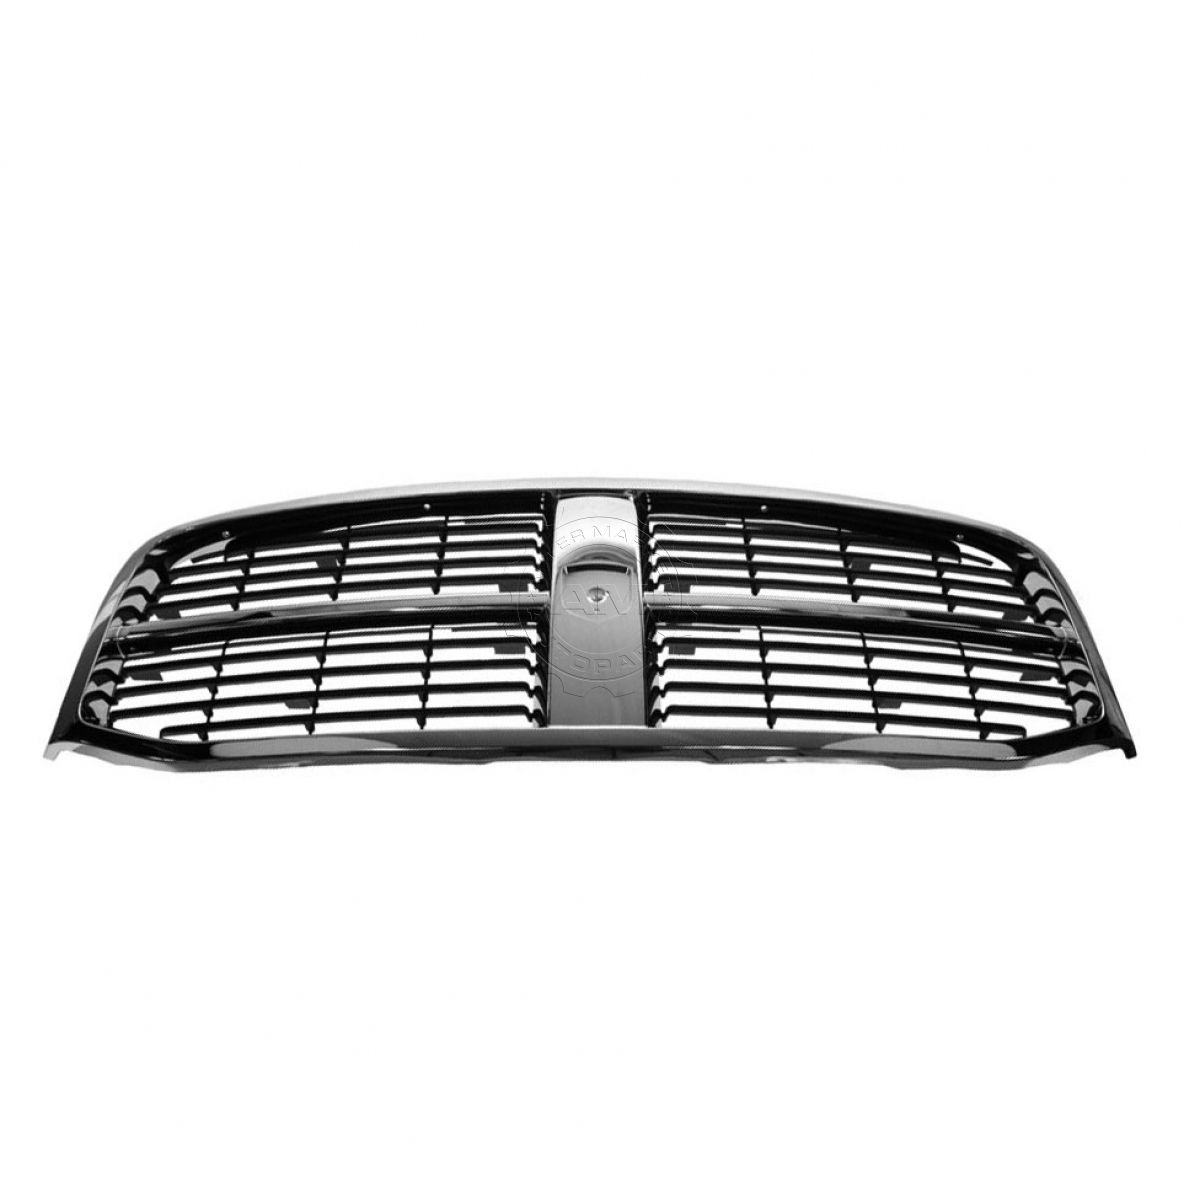 Front End Grille Grill Chrome & Black NEW for Dodge Ram Pickup Truck